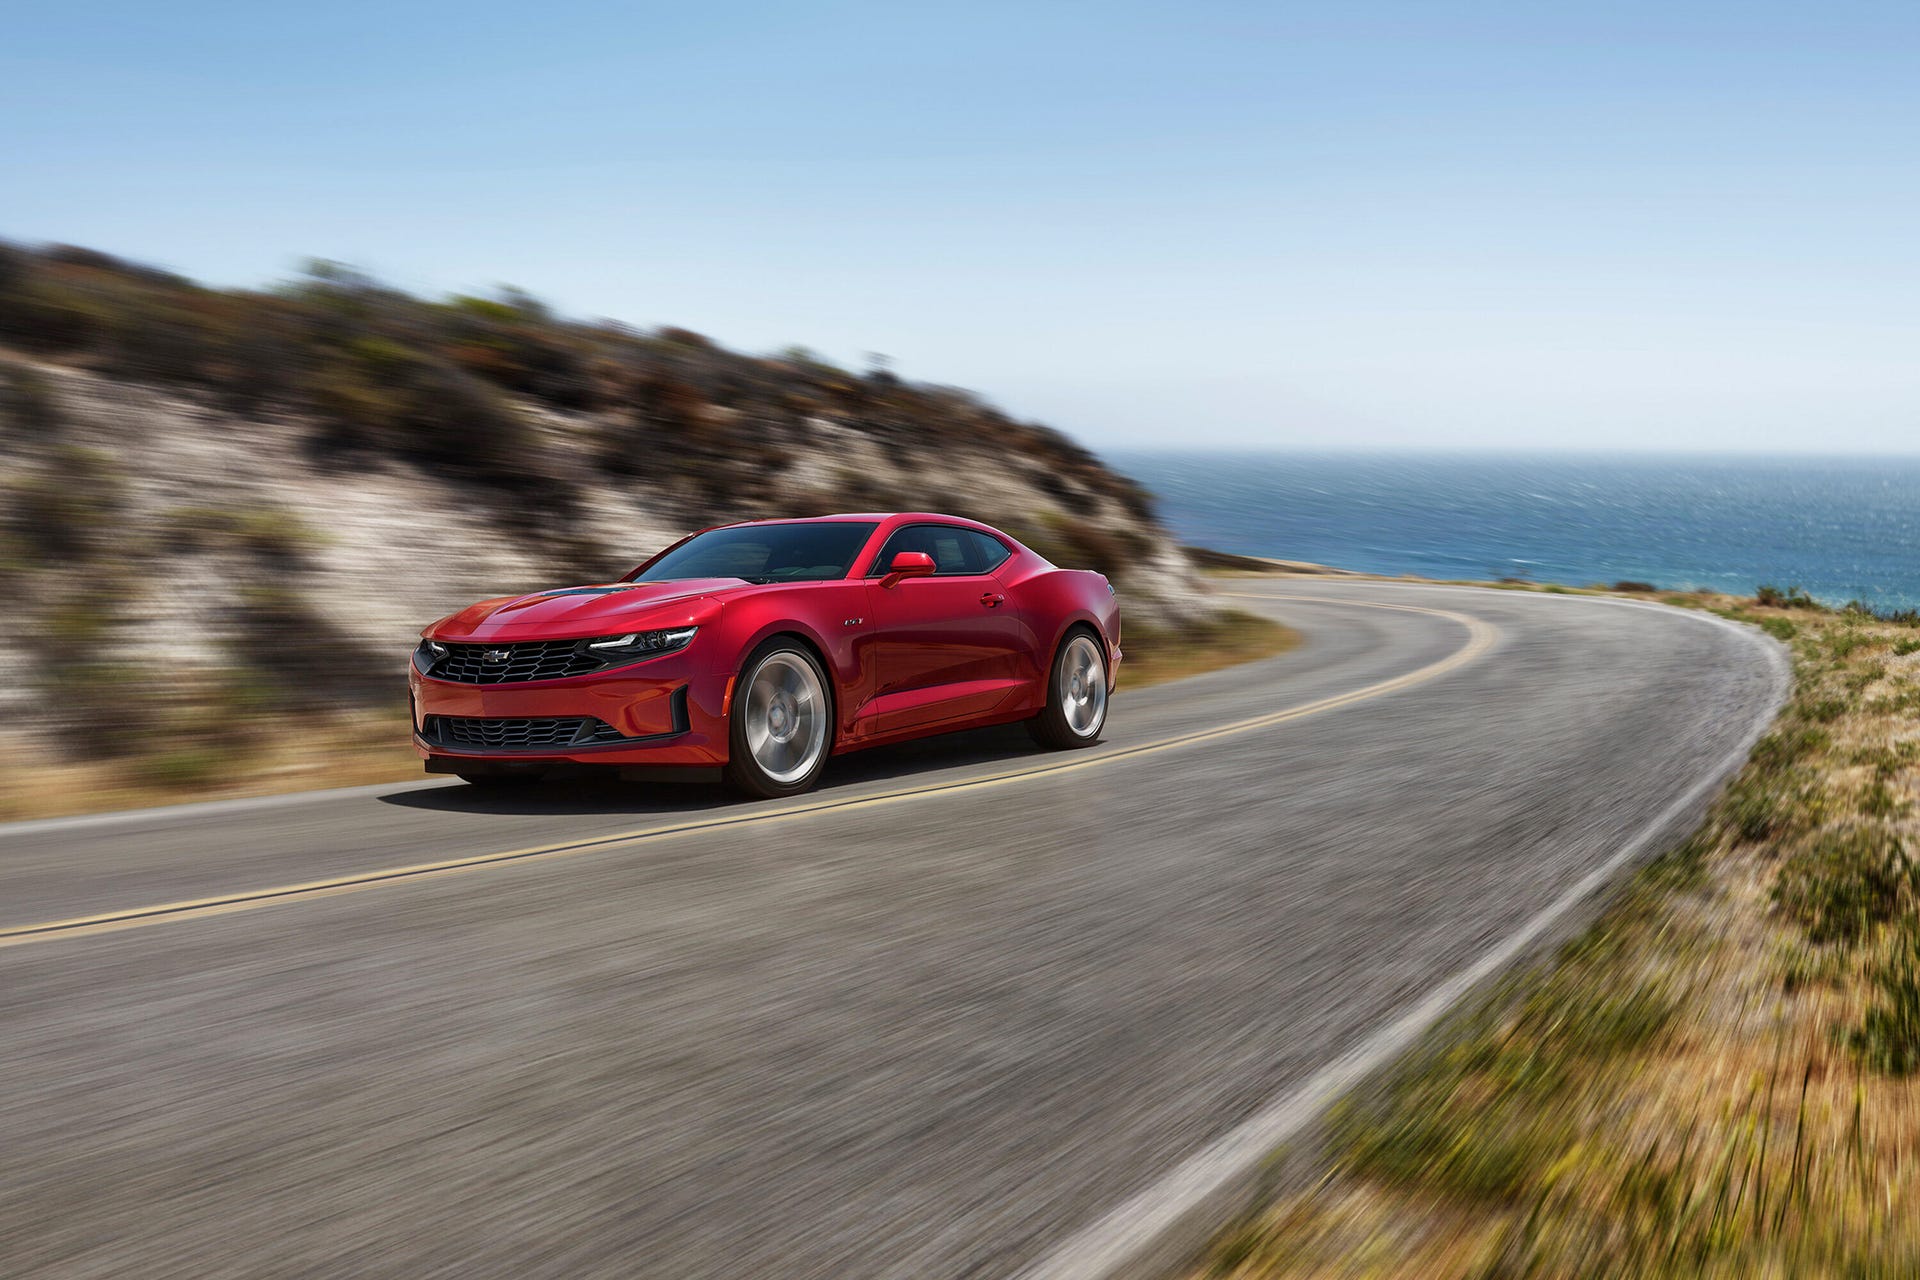 2021 Chevy Camaro LT1 has a downright sweet lease deal right now - CNET